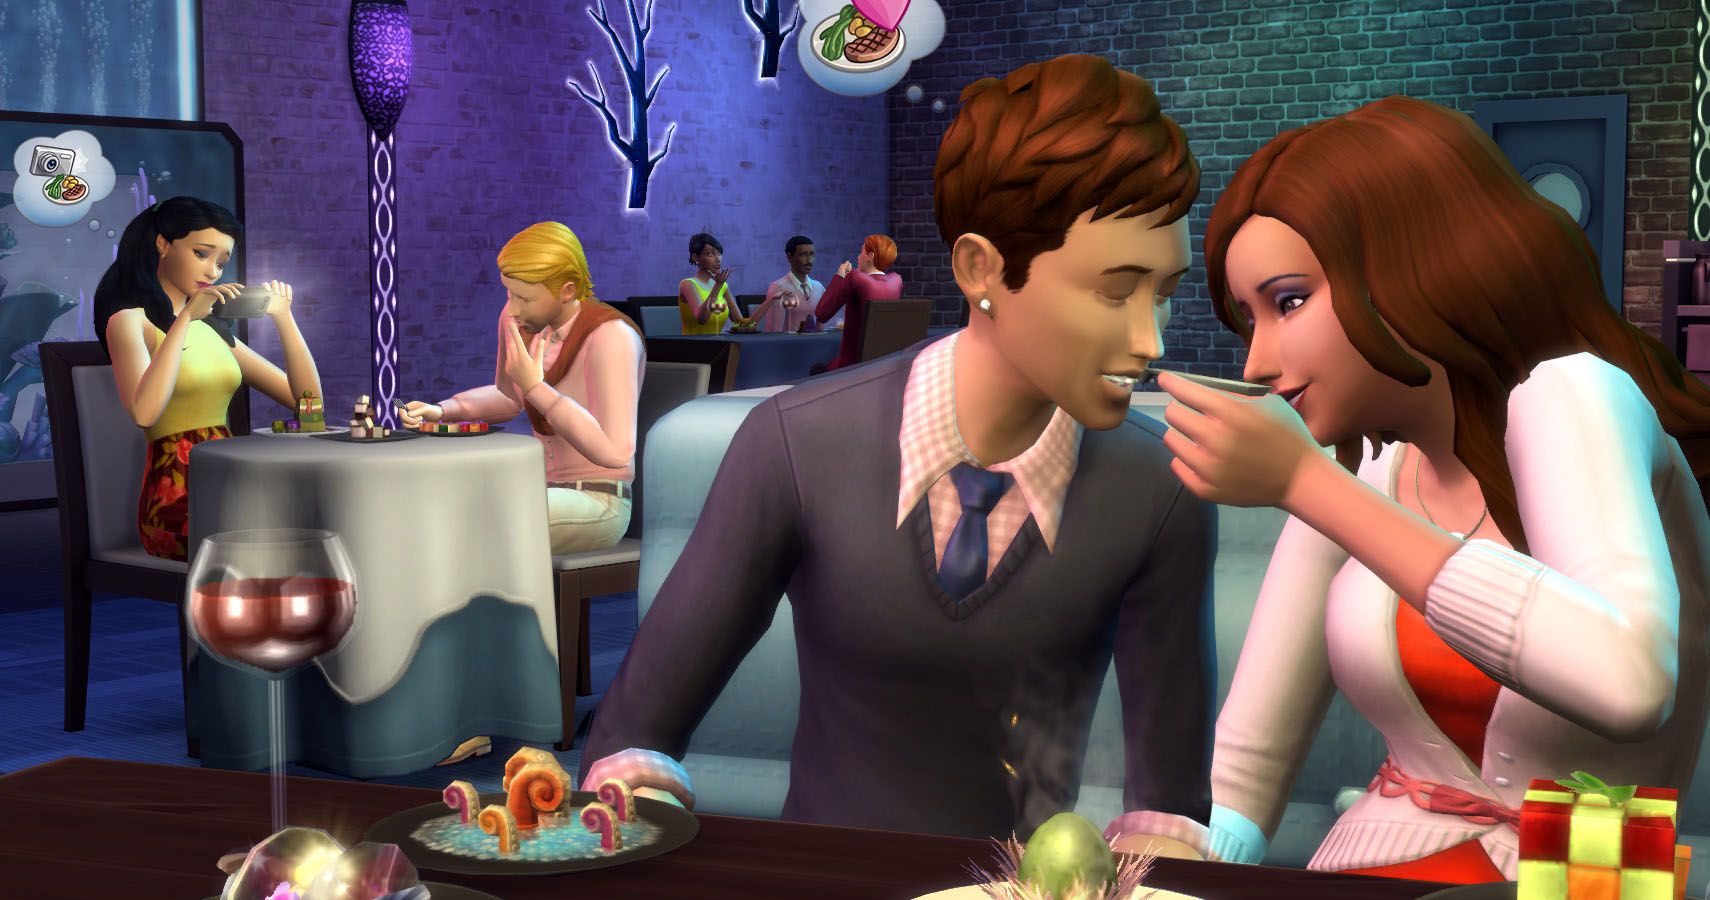 Two couples having food in a restaurant in the sims 4.